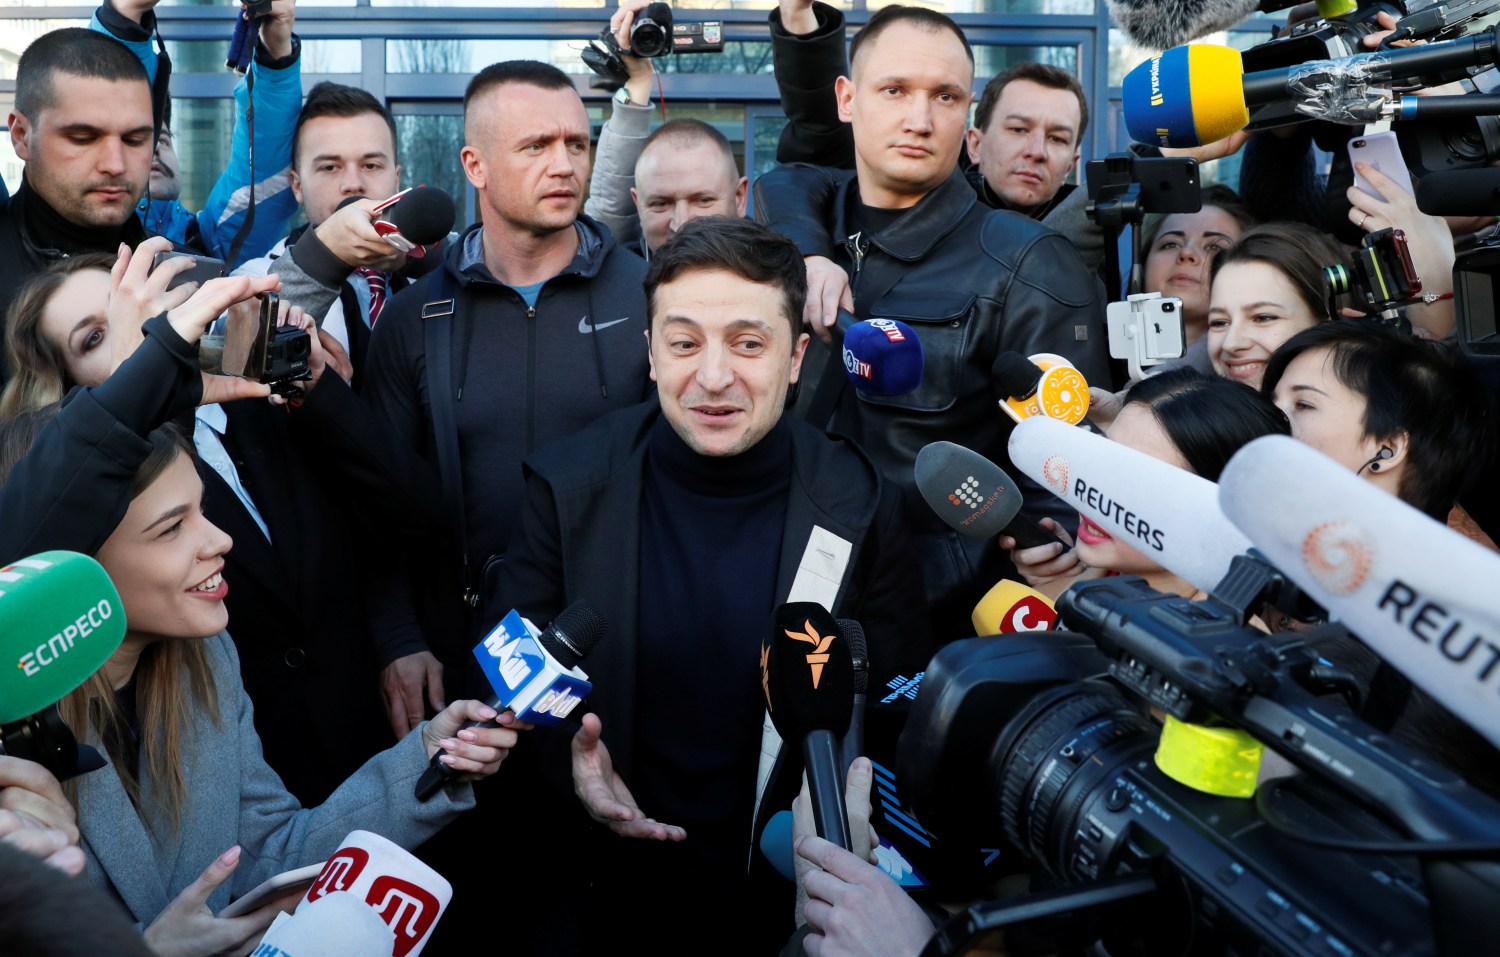 Ukrainian presidential candidate and comedian Volodymyr Zelenskiy speaks with journalists after undergoing a drugs and alcohol test, which is a precondition to participate in a policy debate ahead of the second round of a presidential election, outside a hospital in Kiev, Ukraine April 5, 2019. REUTERS/Valentyn Ogirenko - RC1A3AA14F40